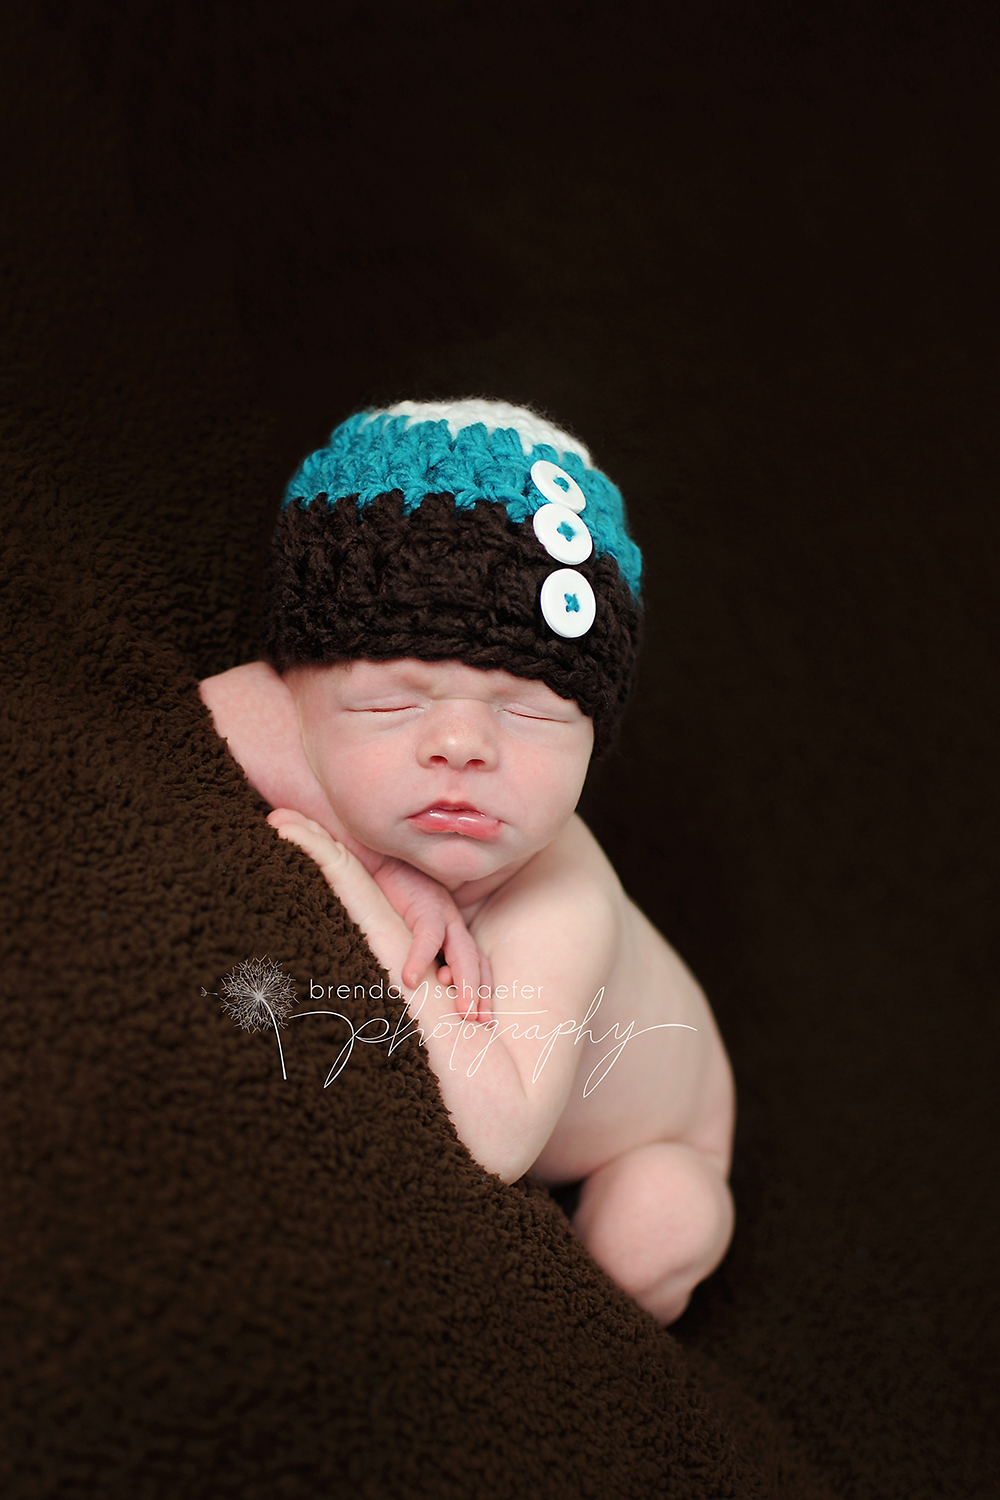 Crochet Beanie For Baby Boy In White, Aqua Blue, And Brown, Chunky Style - Made To Order